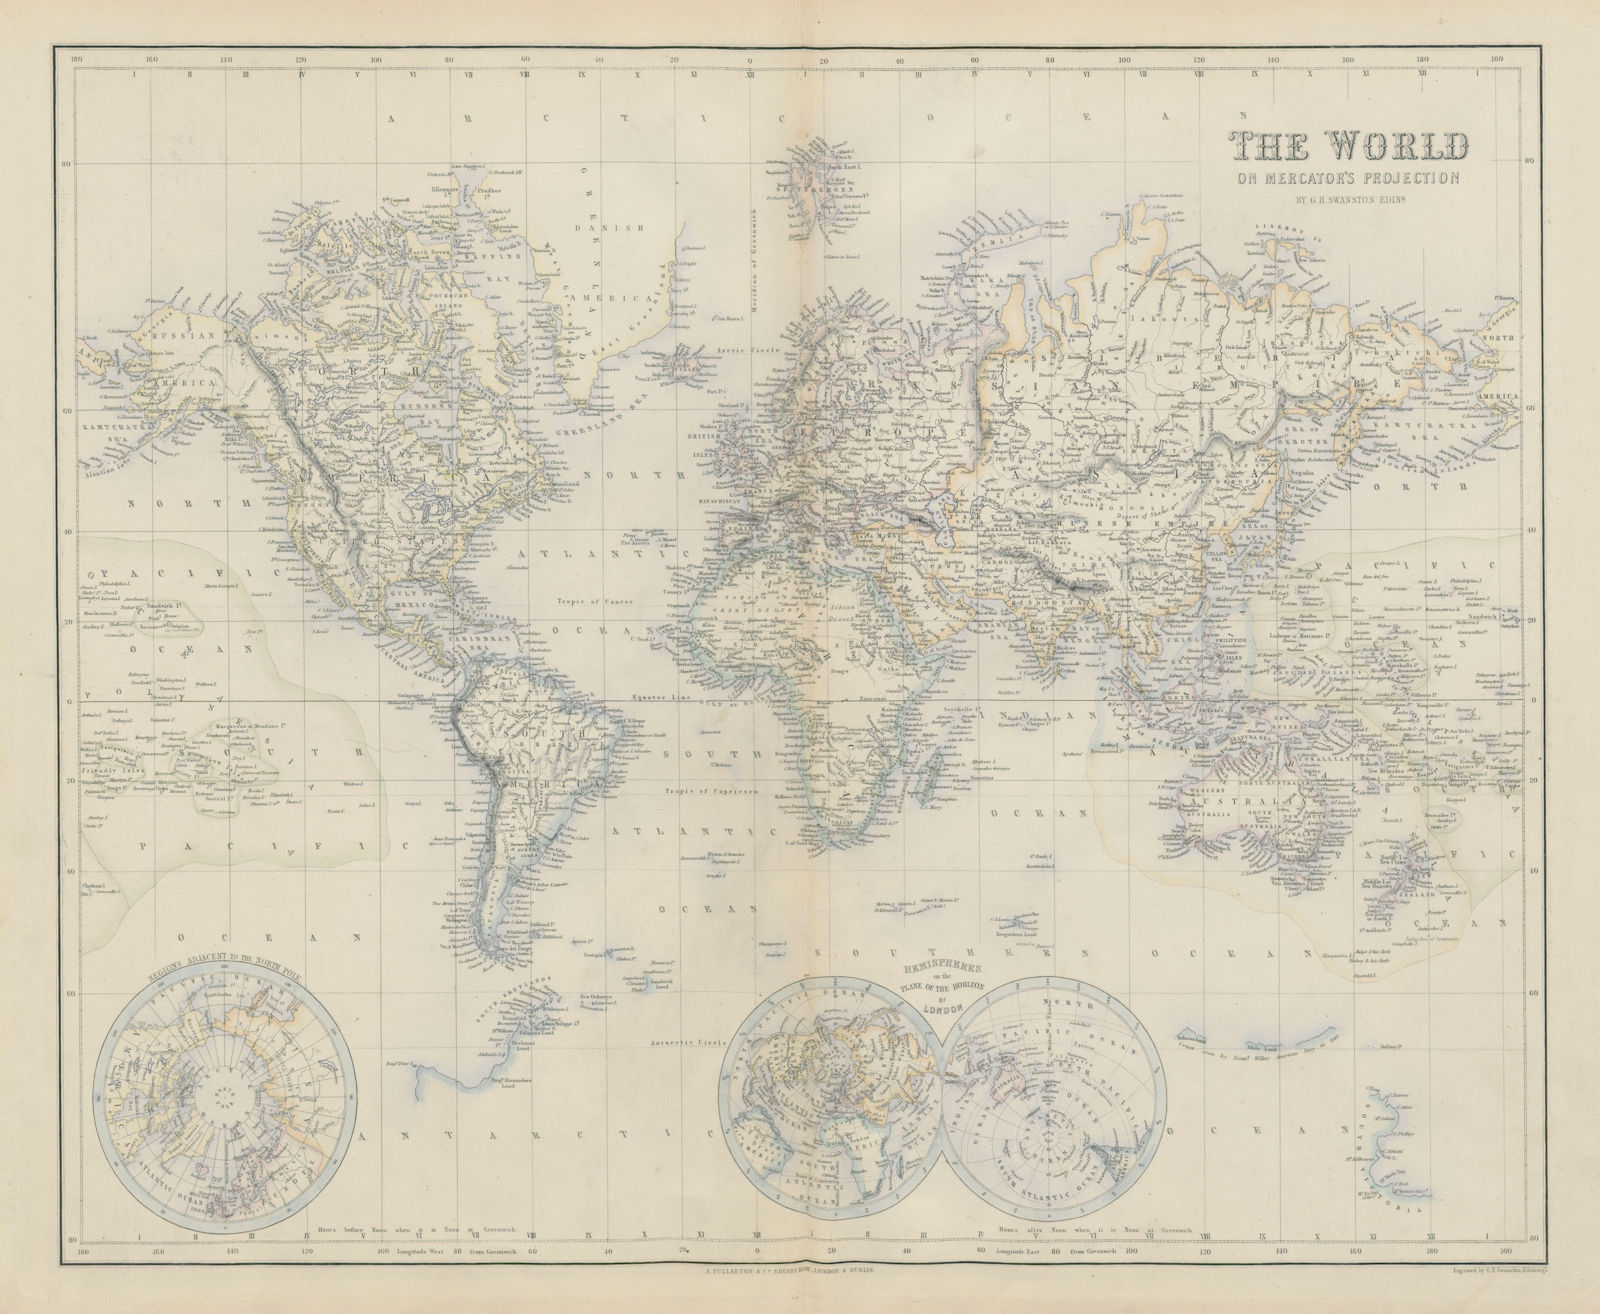 Associate Product The World on Mercator's Projection. SWANSTON 1860 old antique map plan chart